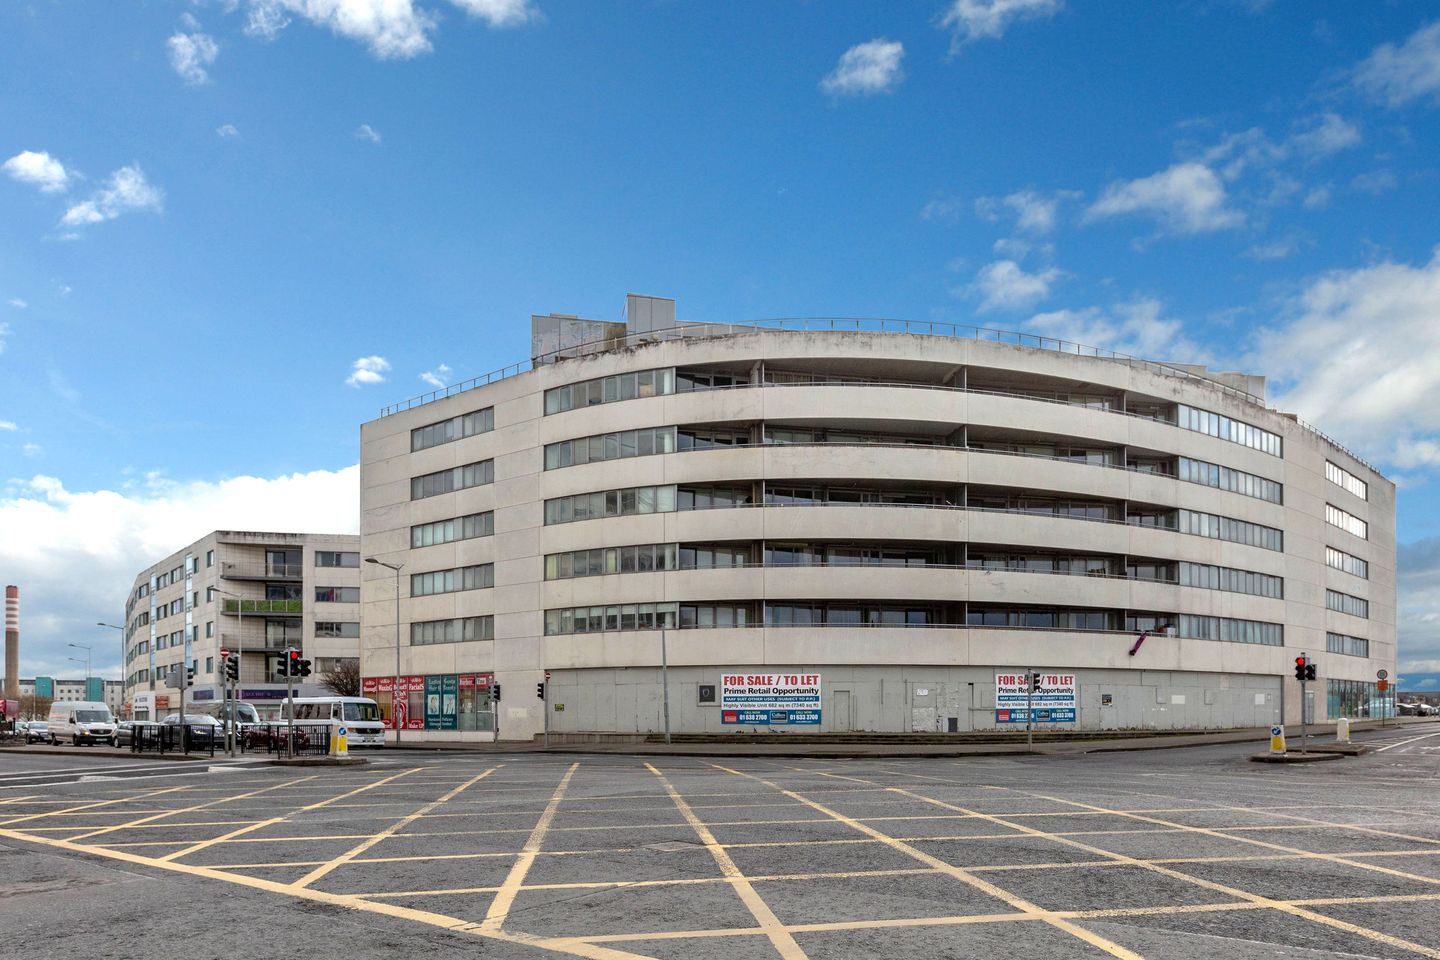 24 Apartments for sale in One Lot, The Plaza & The Charter & The HamptonSantry Cross, Ballymun, Dublin 11